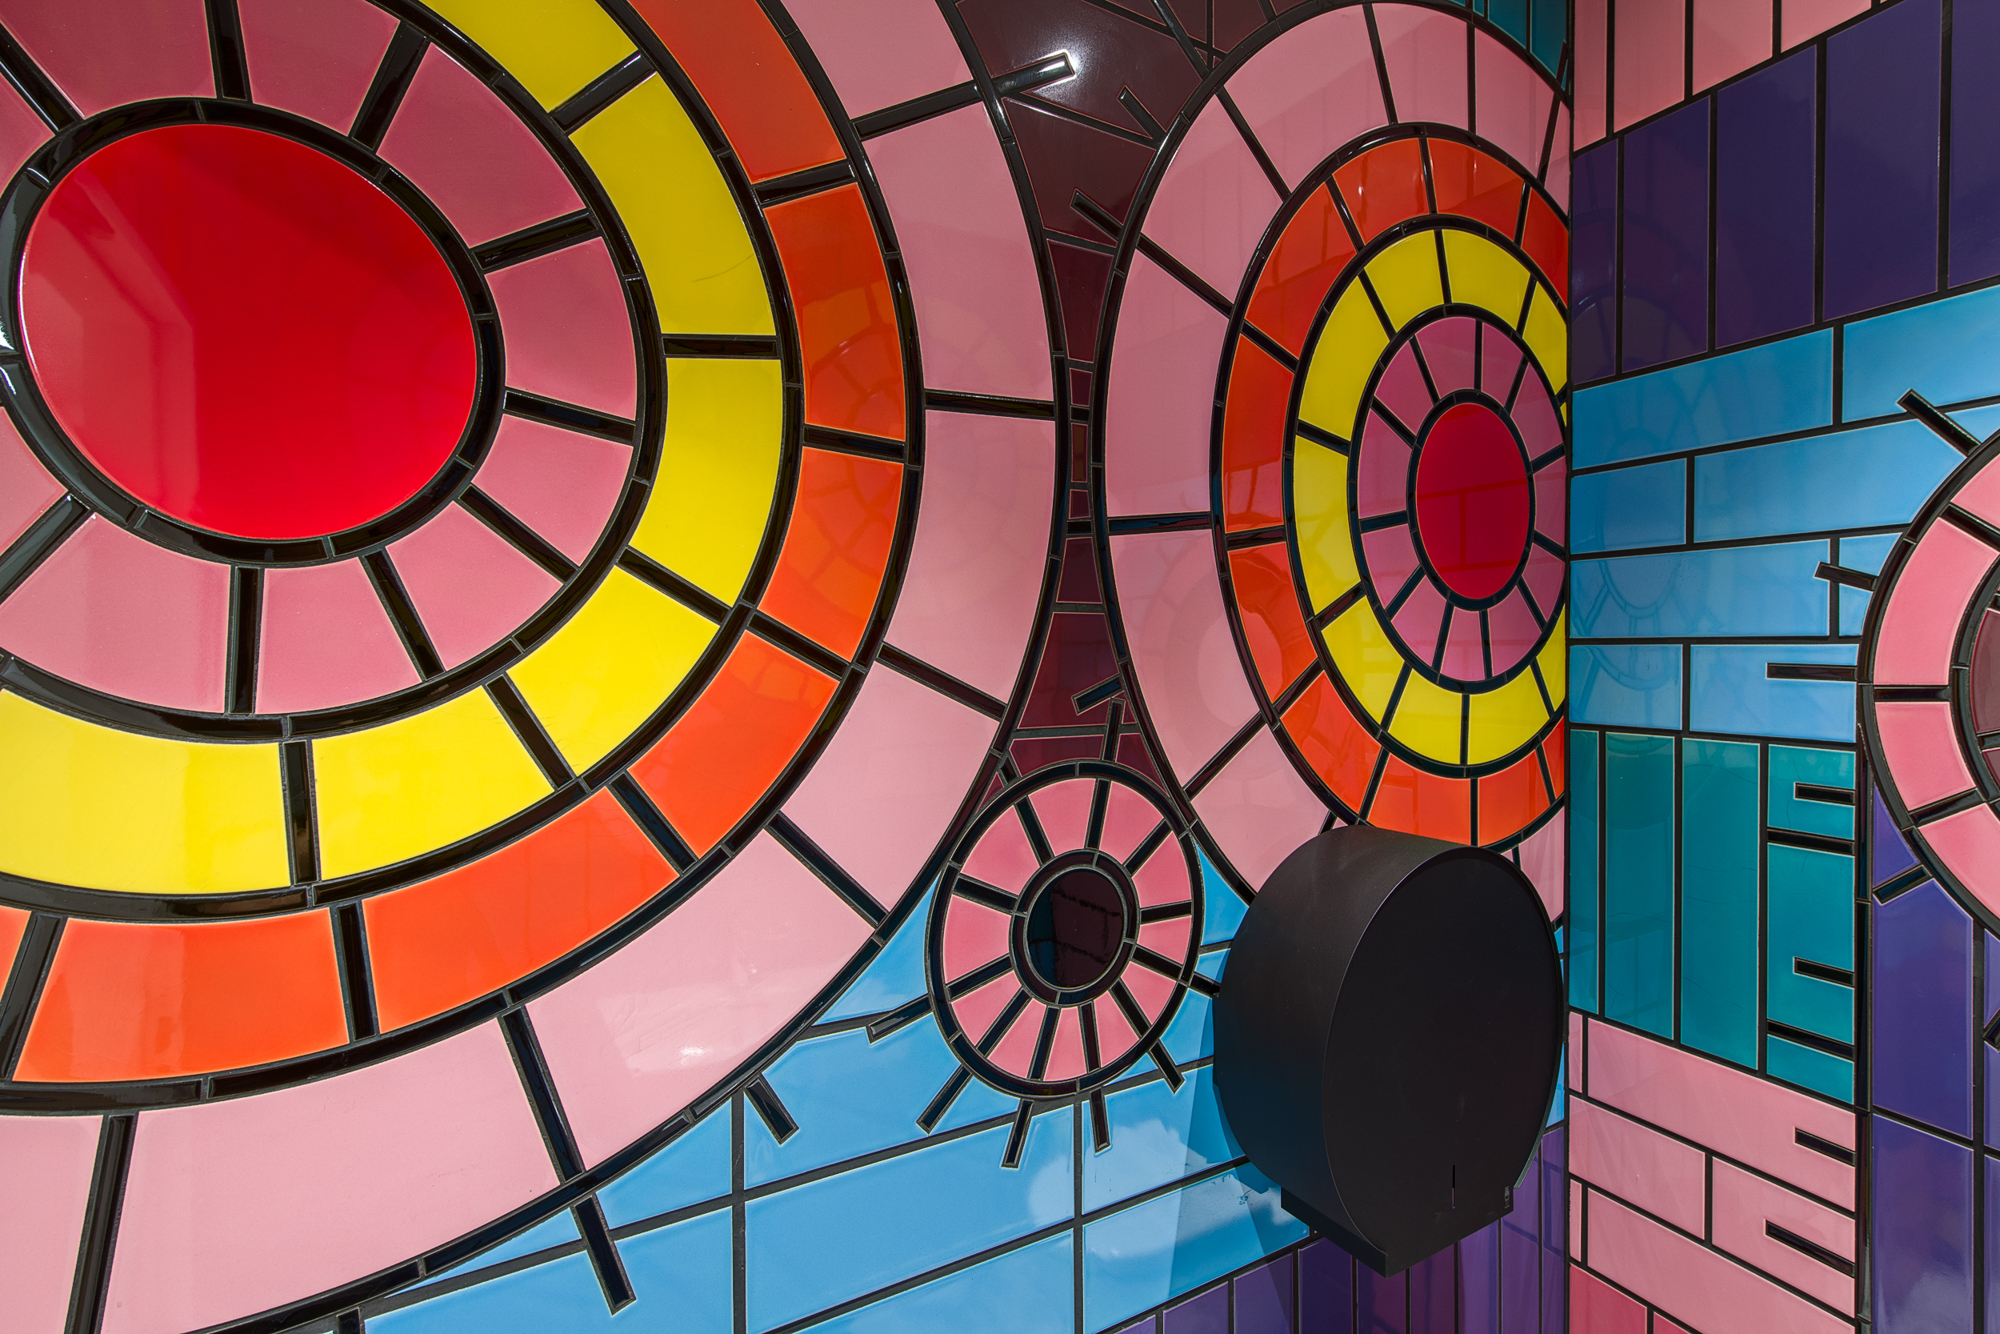 A photograph of 2 tiled walls with a black toilet roll holder on the left wall. The tiles form 2 large circles and one smaller circle, against horizontal stripes of coloured tiles. The larger circles are made of pink, yellow and orange tiles, with a red circle tile in the centre. The smaller circle is made of pink tiles with a black circle in the centre. All the circles have black tiles coming out of them in lines.